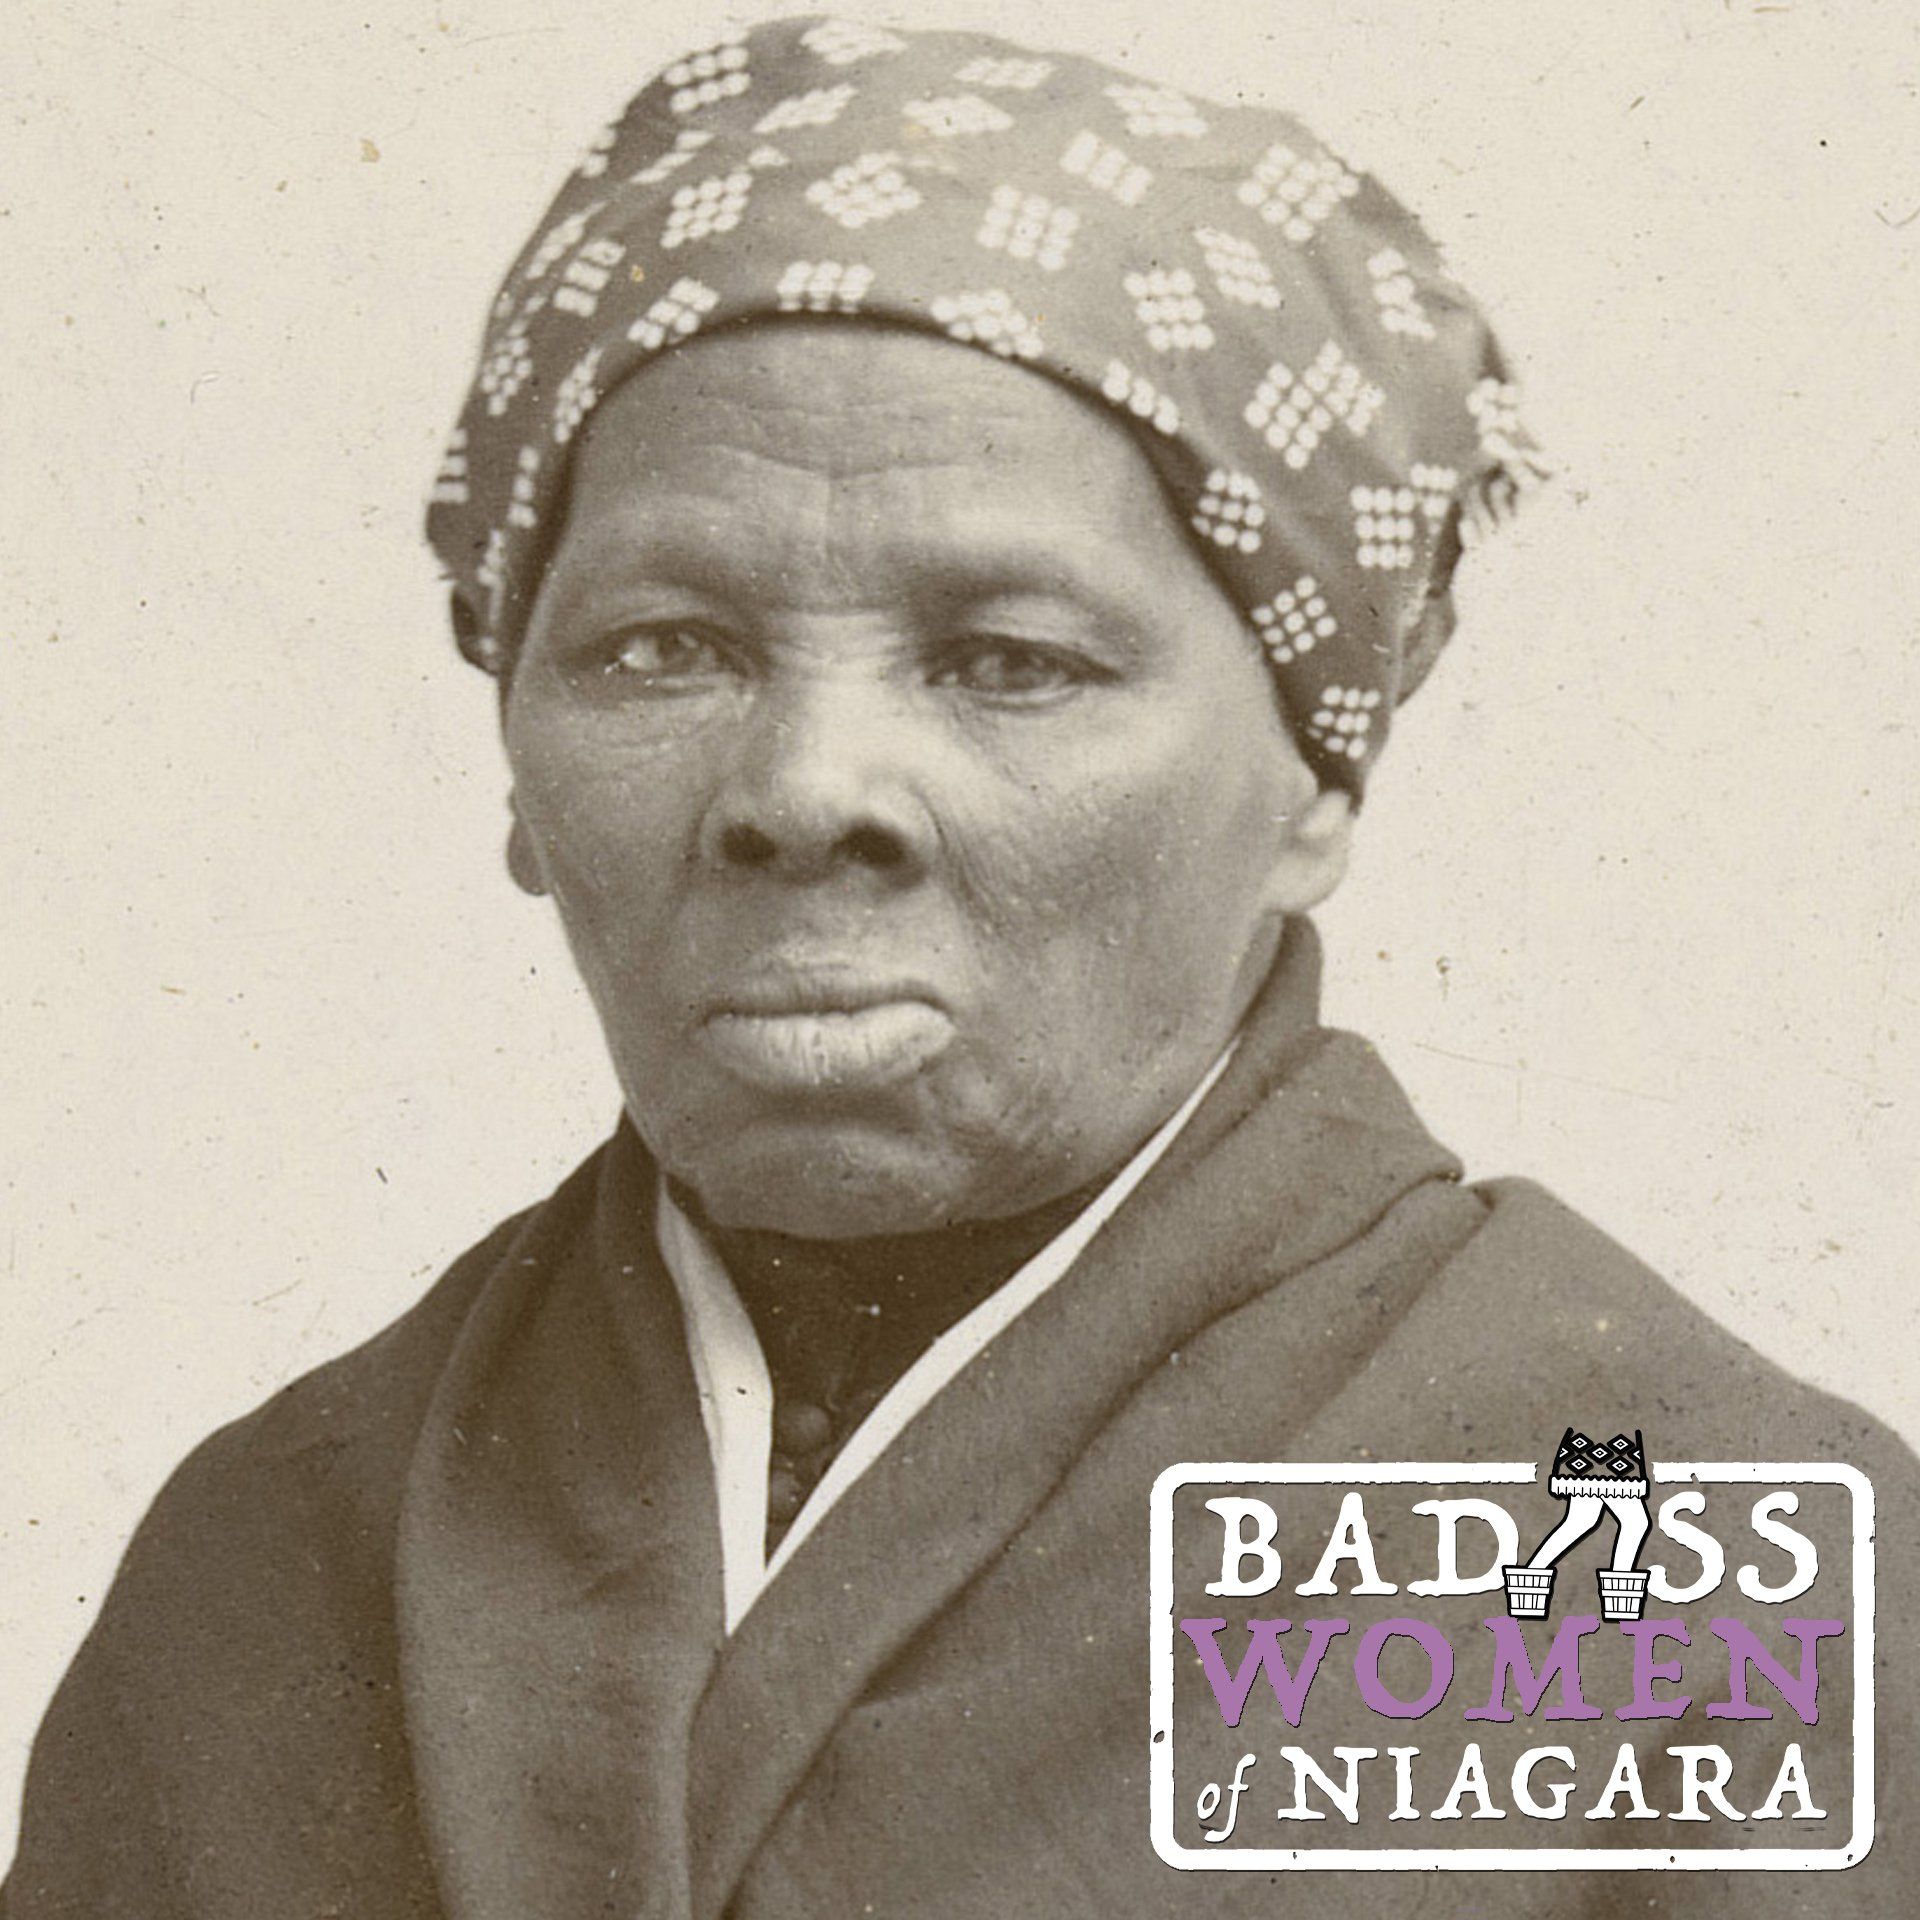 Harriet Tubman, the extraordinary Underground Railroad activist, led many groups over the Suspension Bridge right here in Niagara Falls. Bringing refugees from slavery in Maryland to freedom in Canada, she gazed upon the shoreline that is visible right outside of the Niagara Falls Underground Railroad Heritage Center.